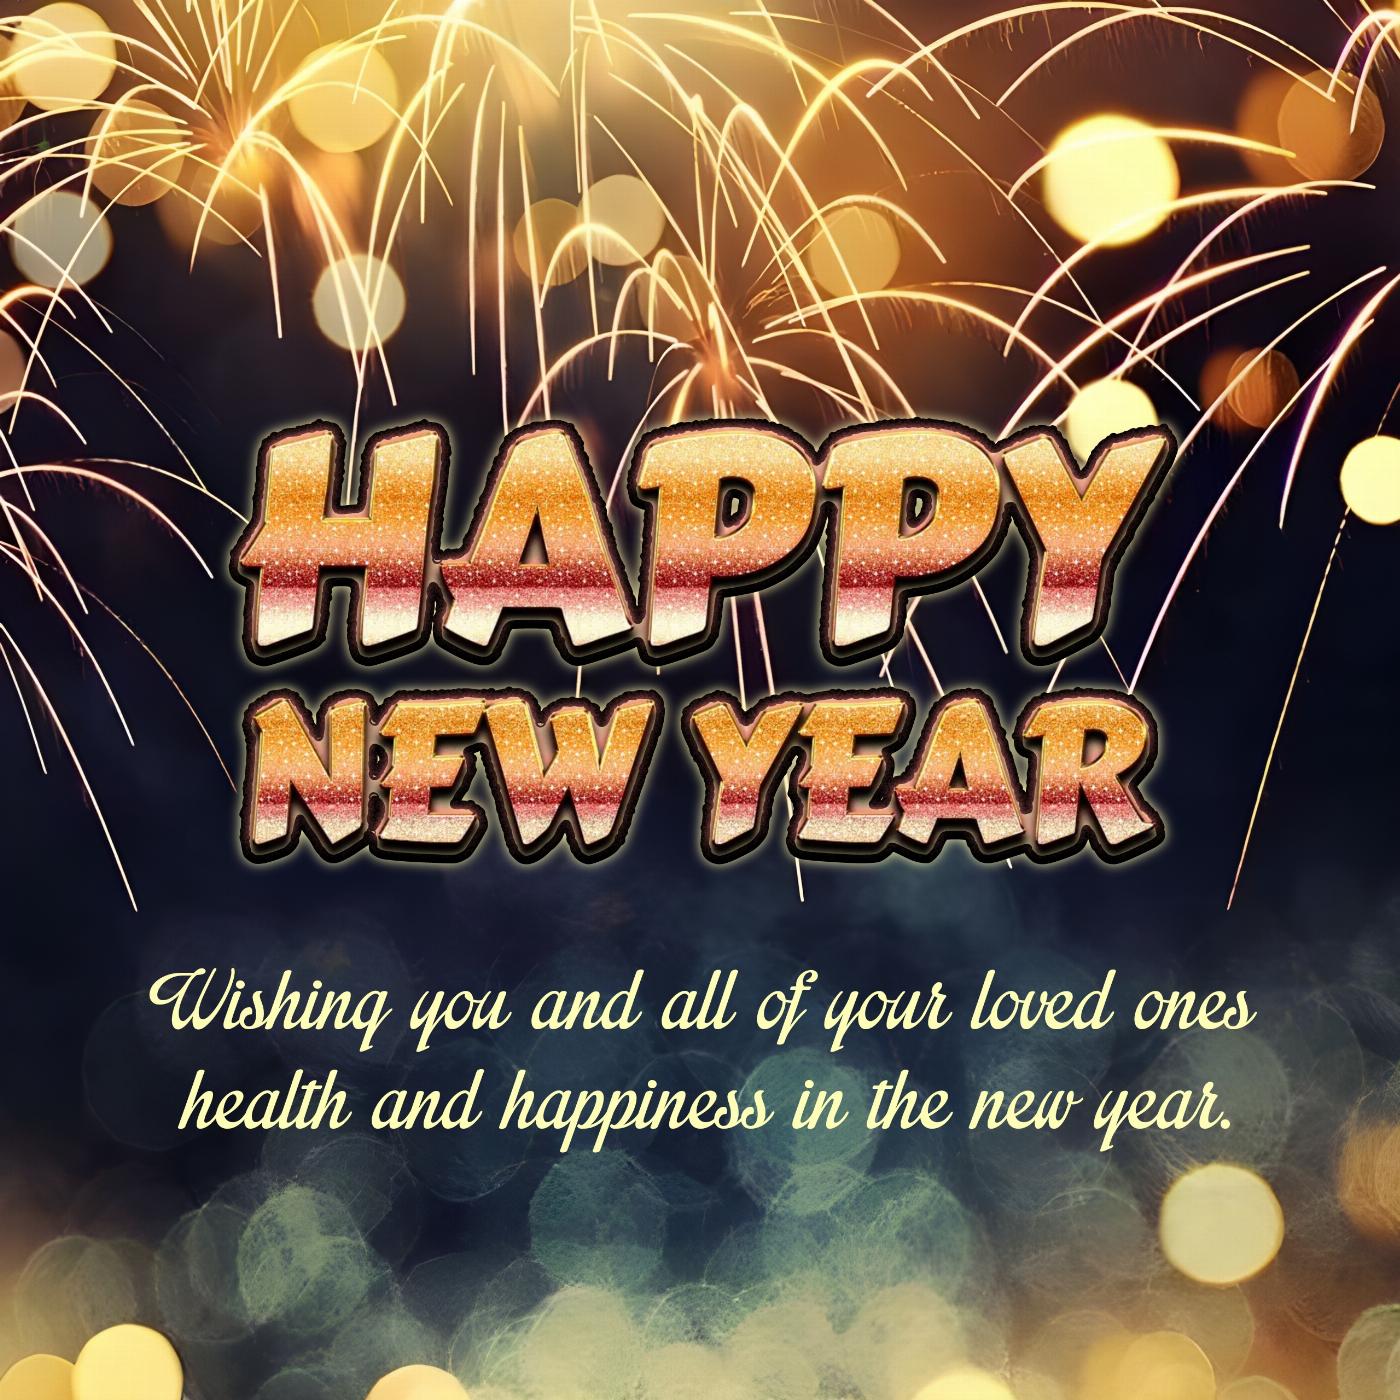 Wishing you and all of your loved ones health and happiness